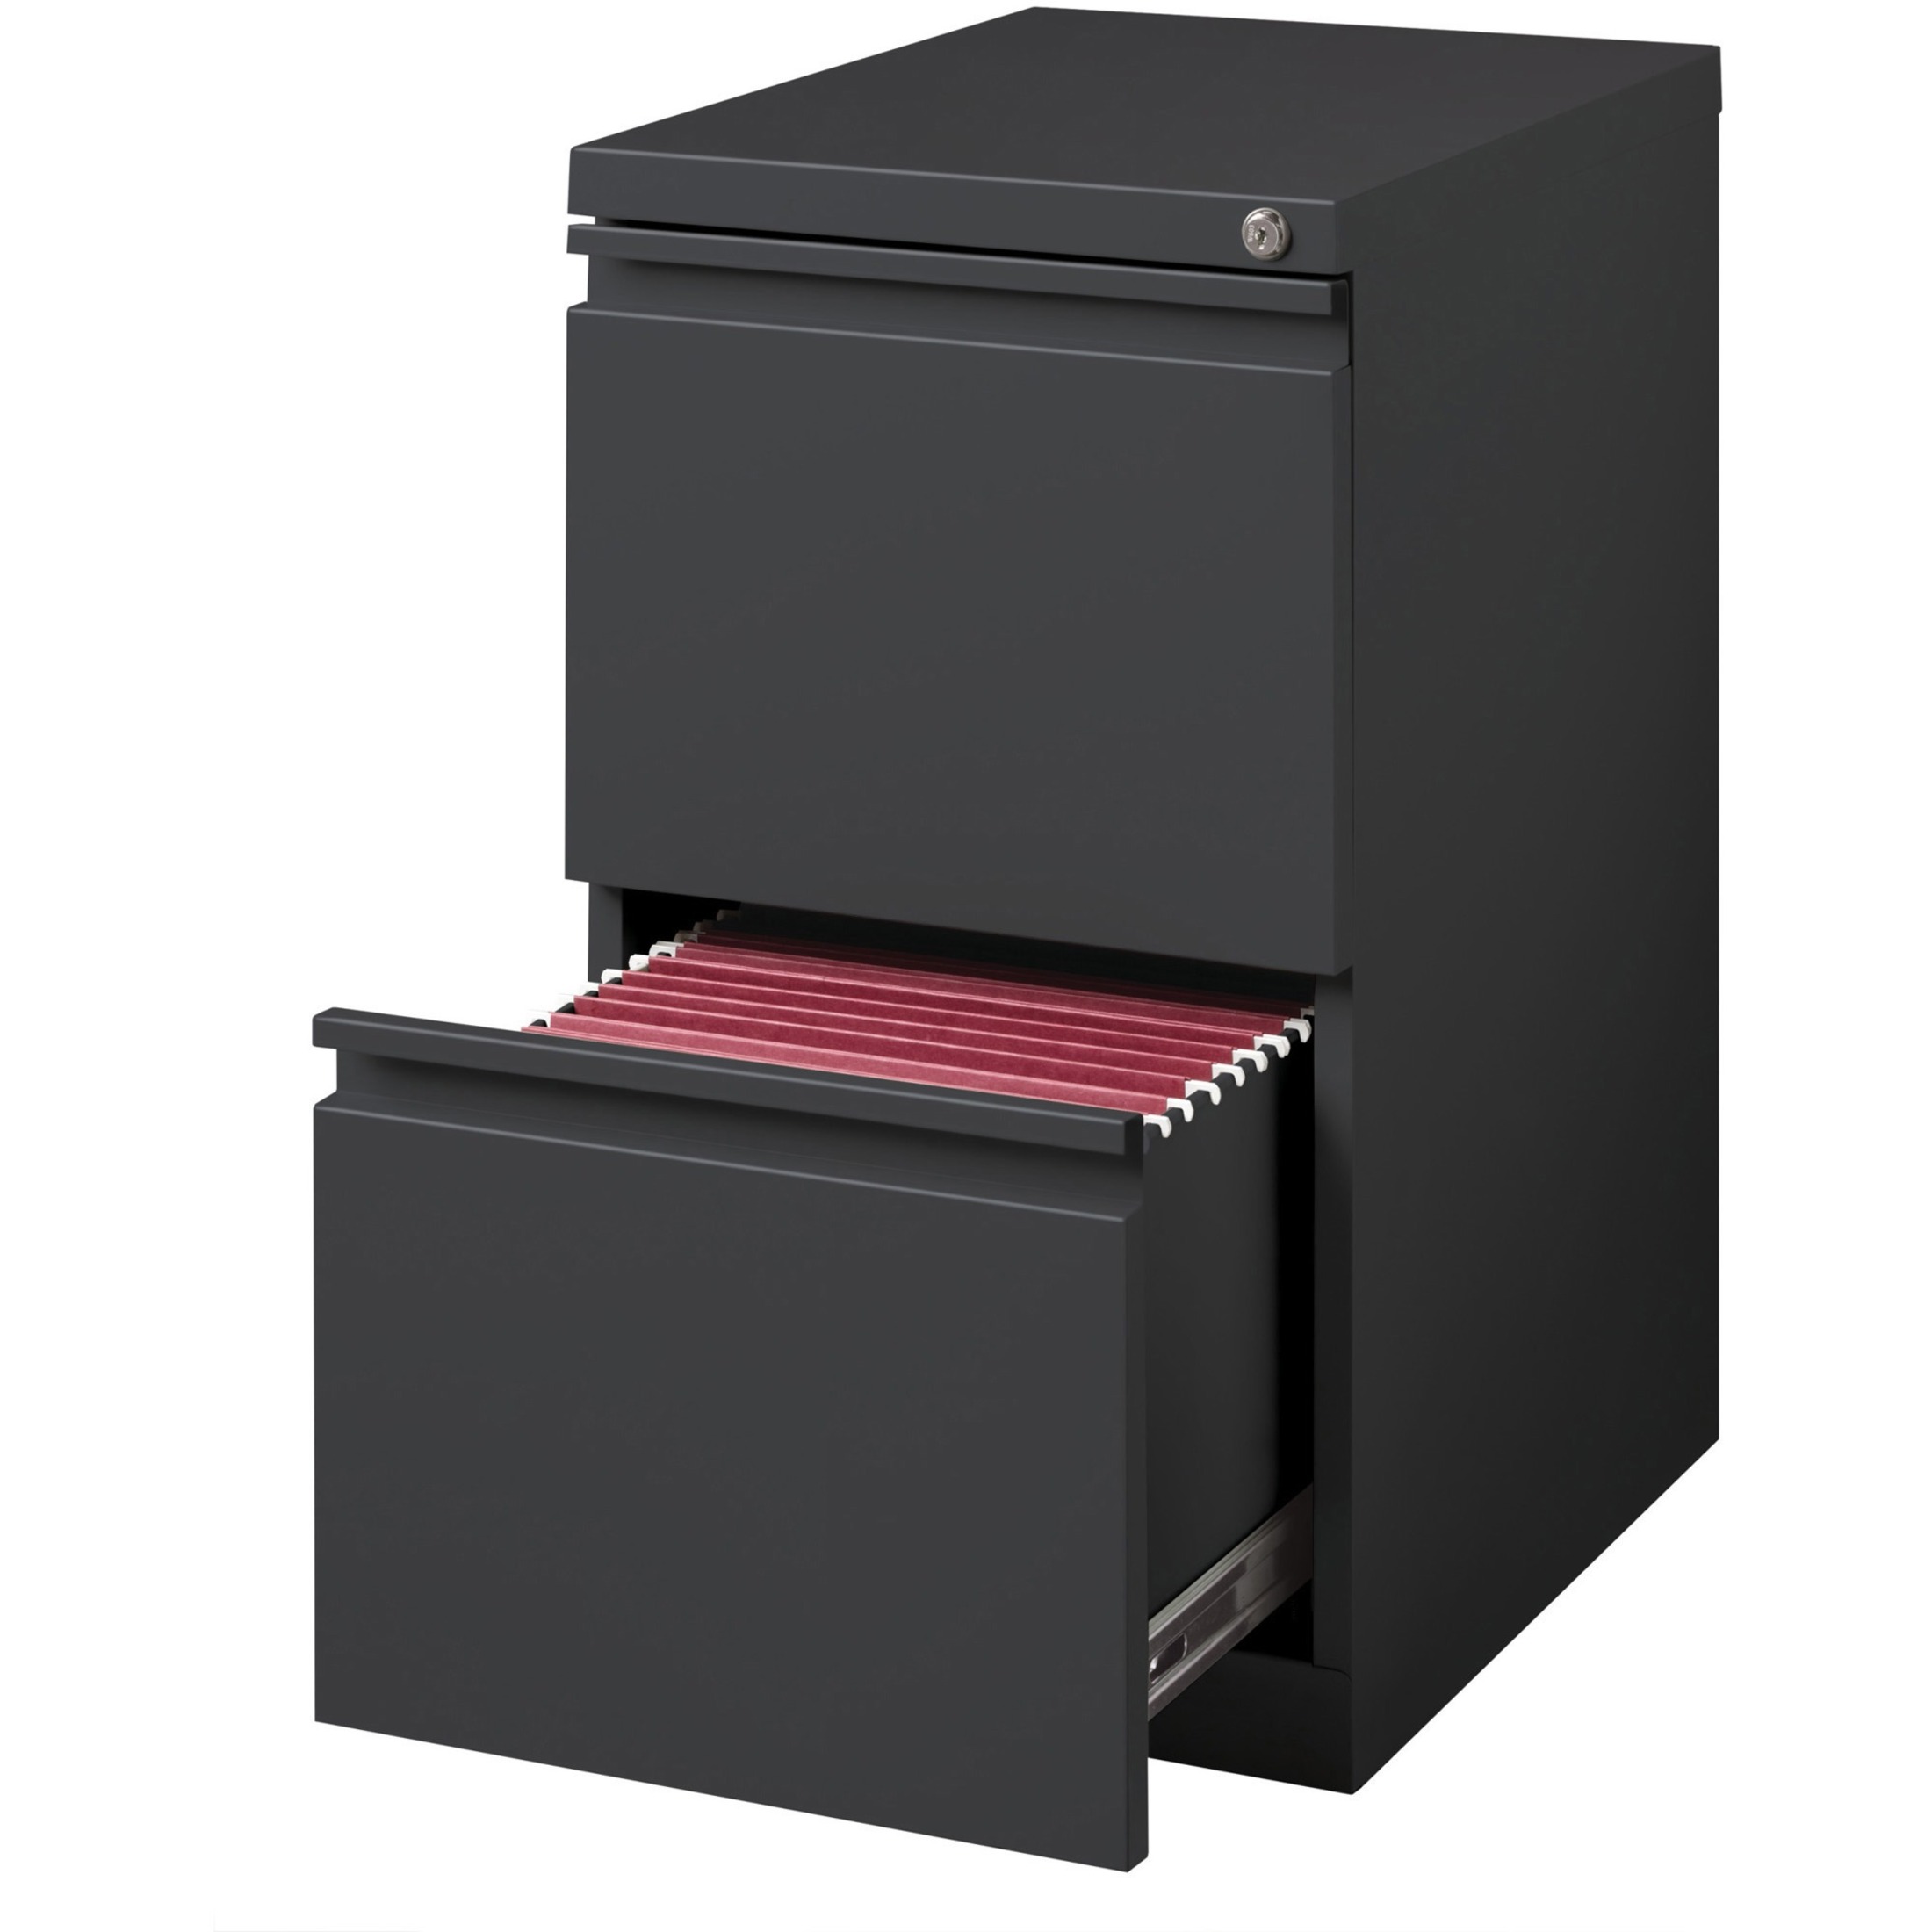 Lorell® 19-7/8"D Vertical 2-Drawer Mobile Pedestal File Cabinet, Charcoal - image 3 of 8